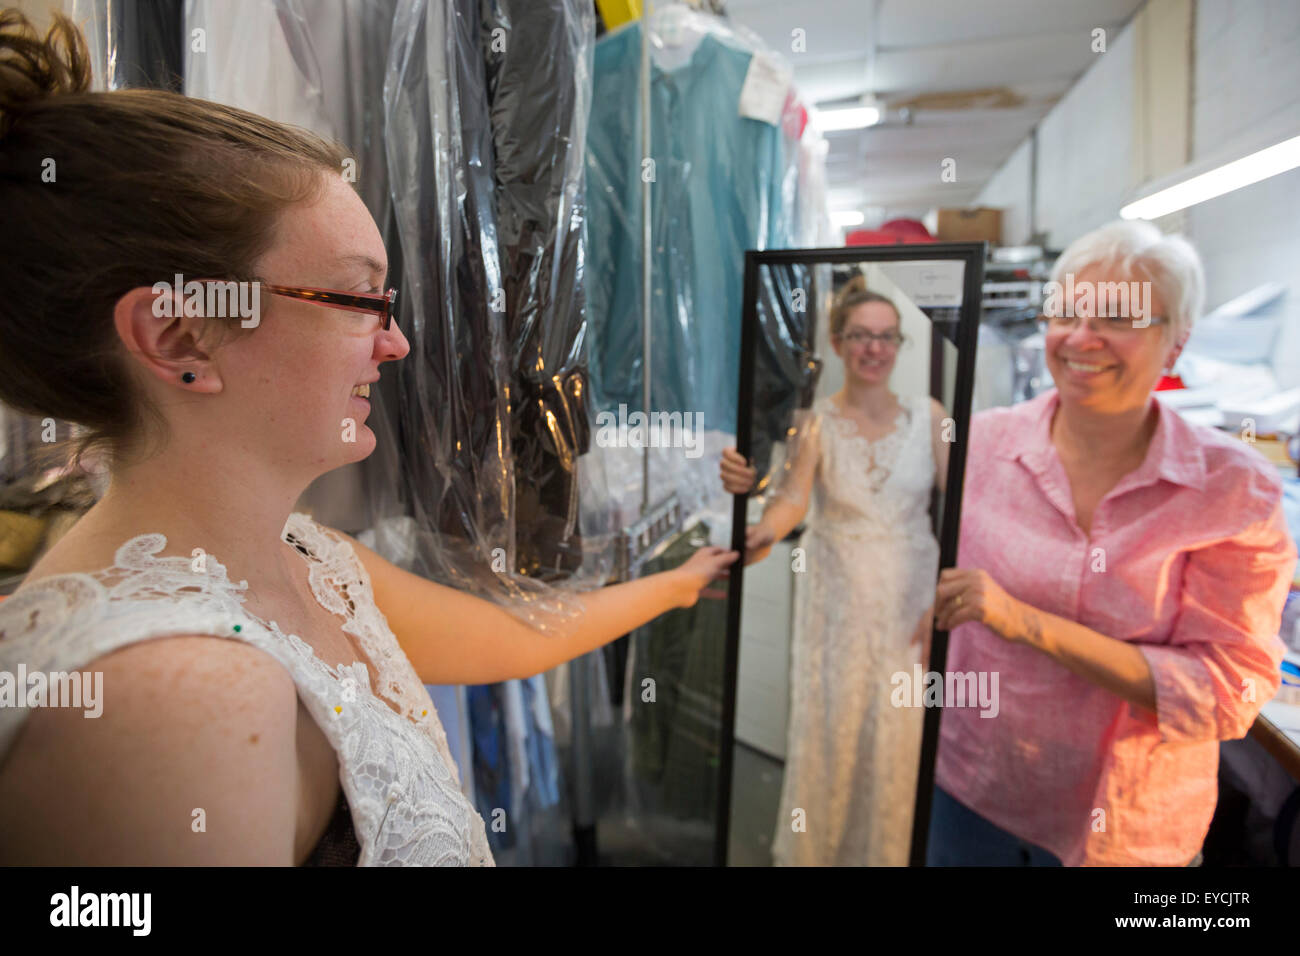 Broomfield, Colorado - A young woman tries on her unfinished wedding dress as her mother watches. Stock Photo